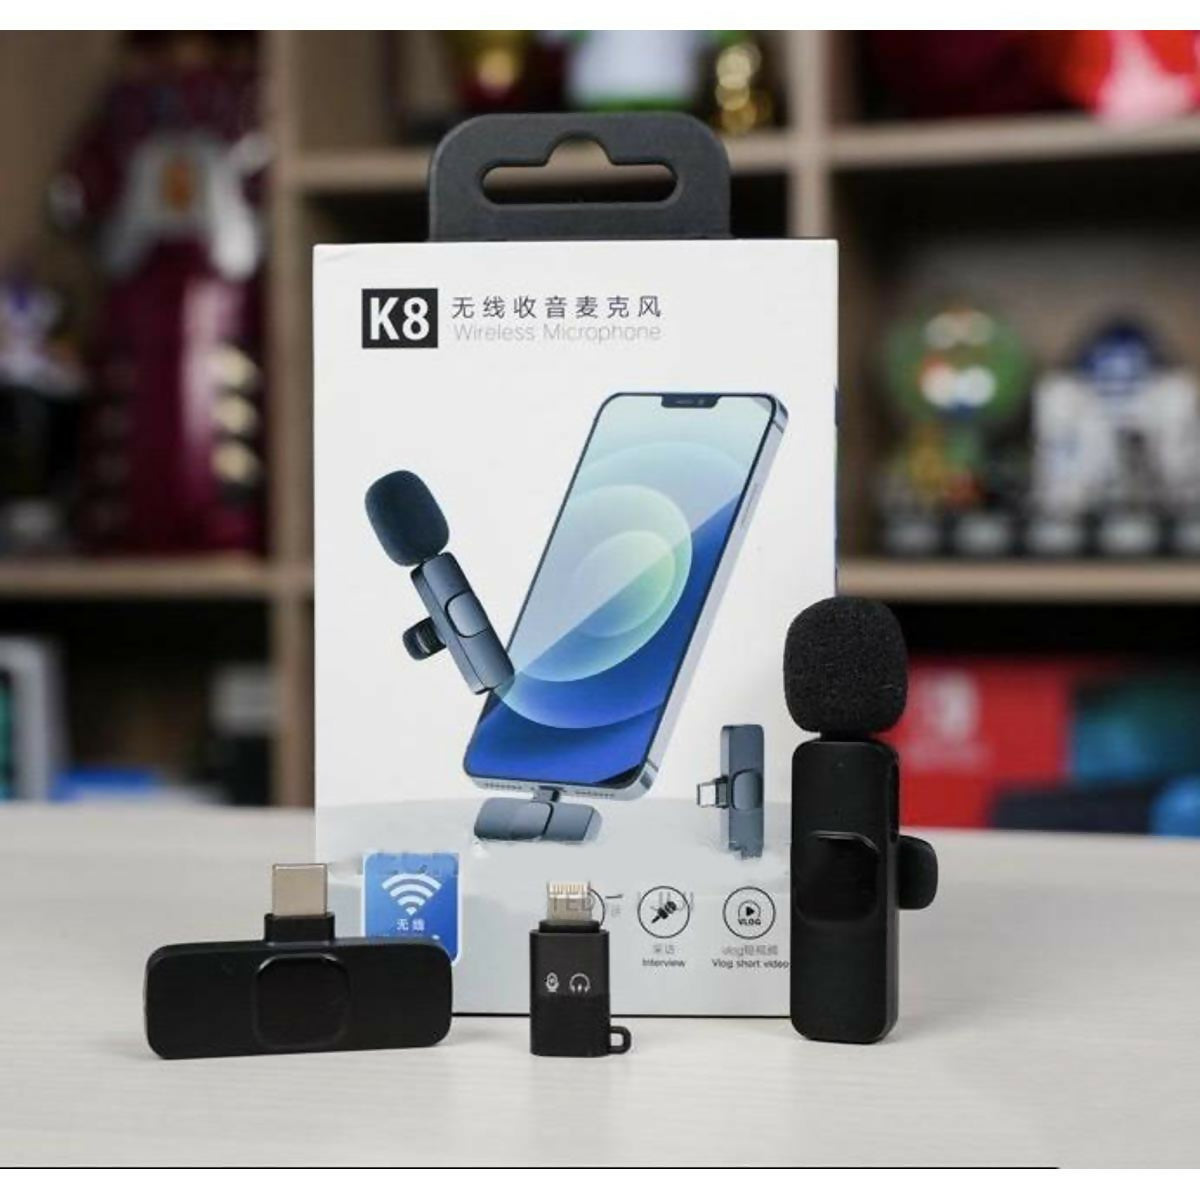 NEW K8 MIC WIRELESS BLUETOOTH MICROPHONE TYPE-C AND LIGHTNING CONNECTOR GOOD QUALITY MIC FOR VLOGGING, RECORDINGS, PODCAST AND OTHE ETC